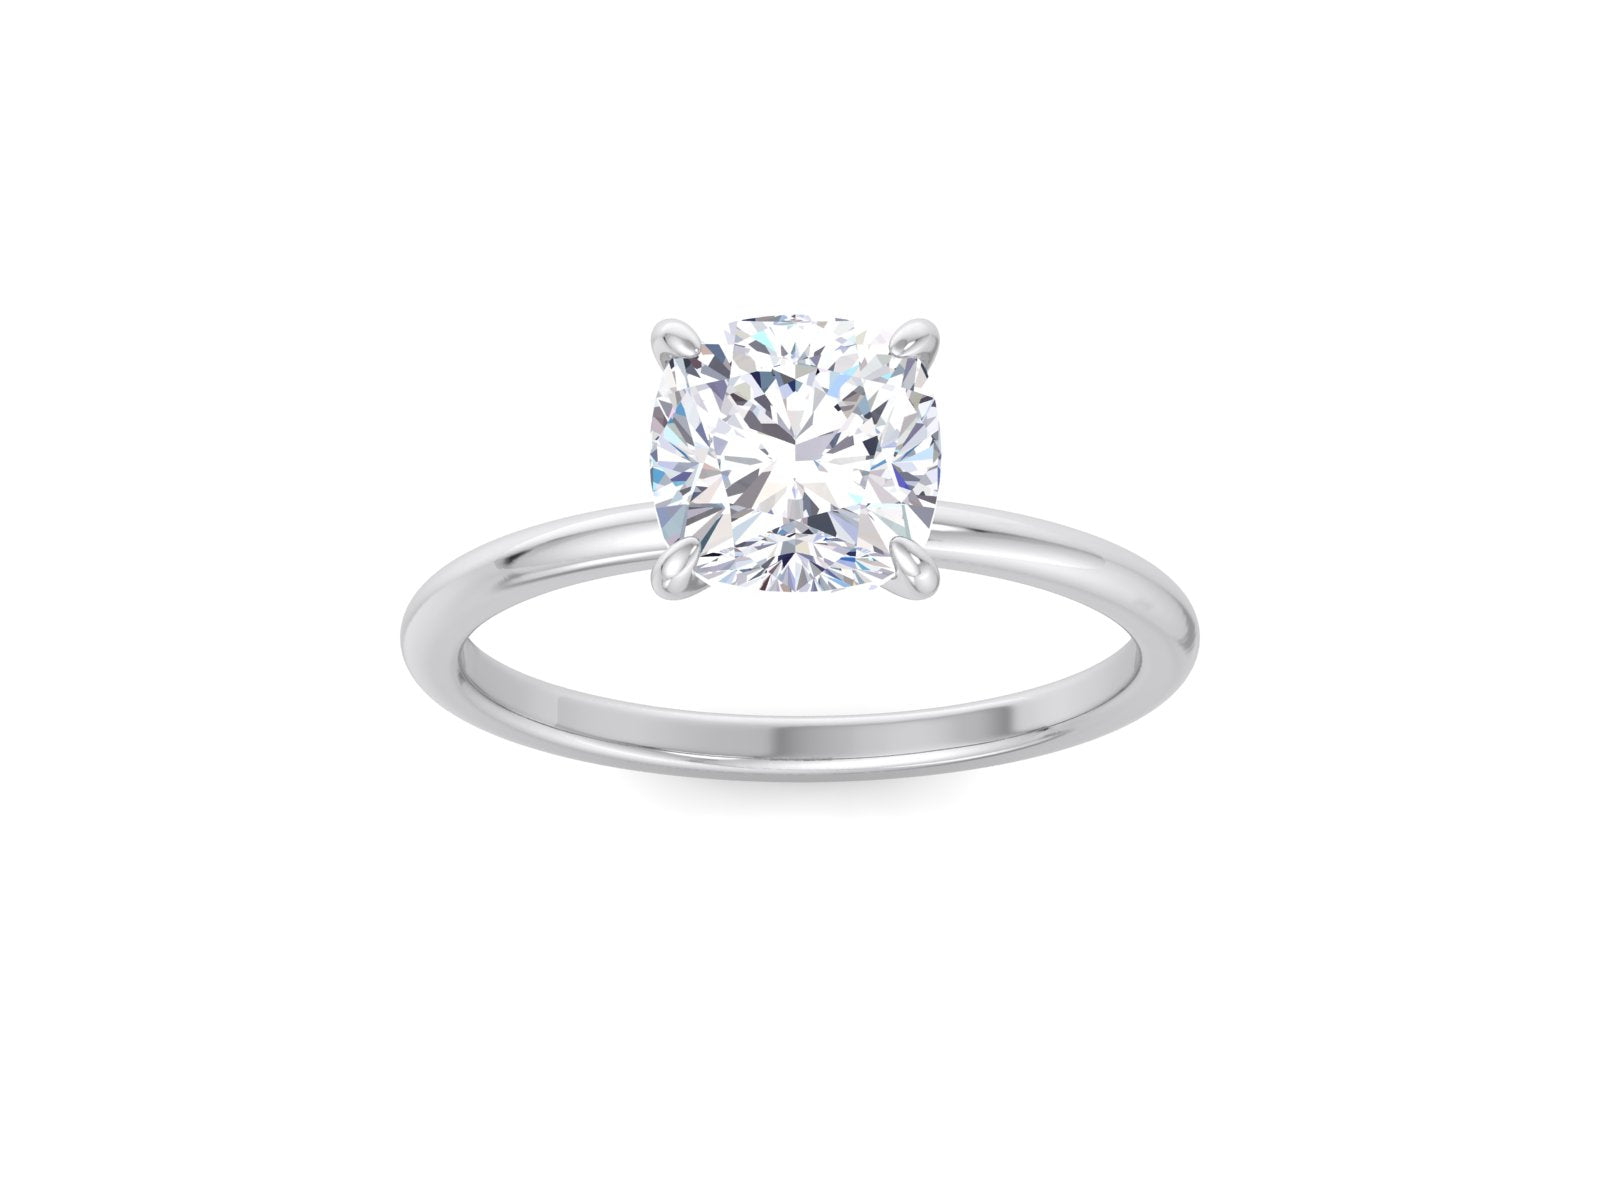 2.5 CT Cushion Cut Solitaire Lab Grown Diamond Engagement Ring